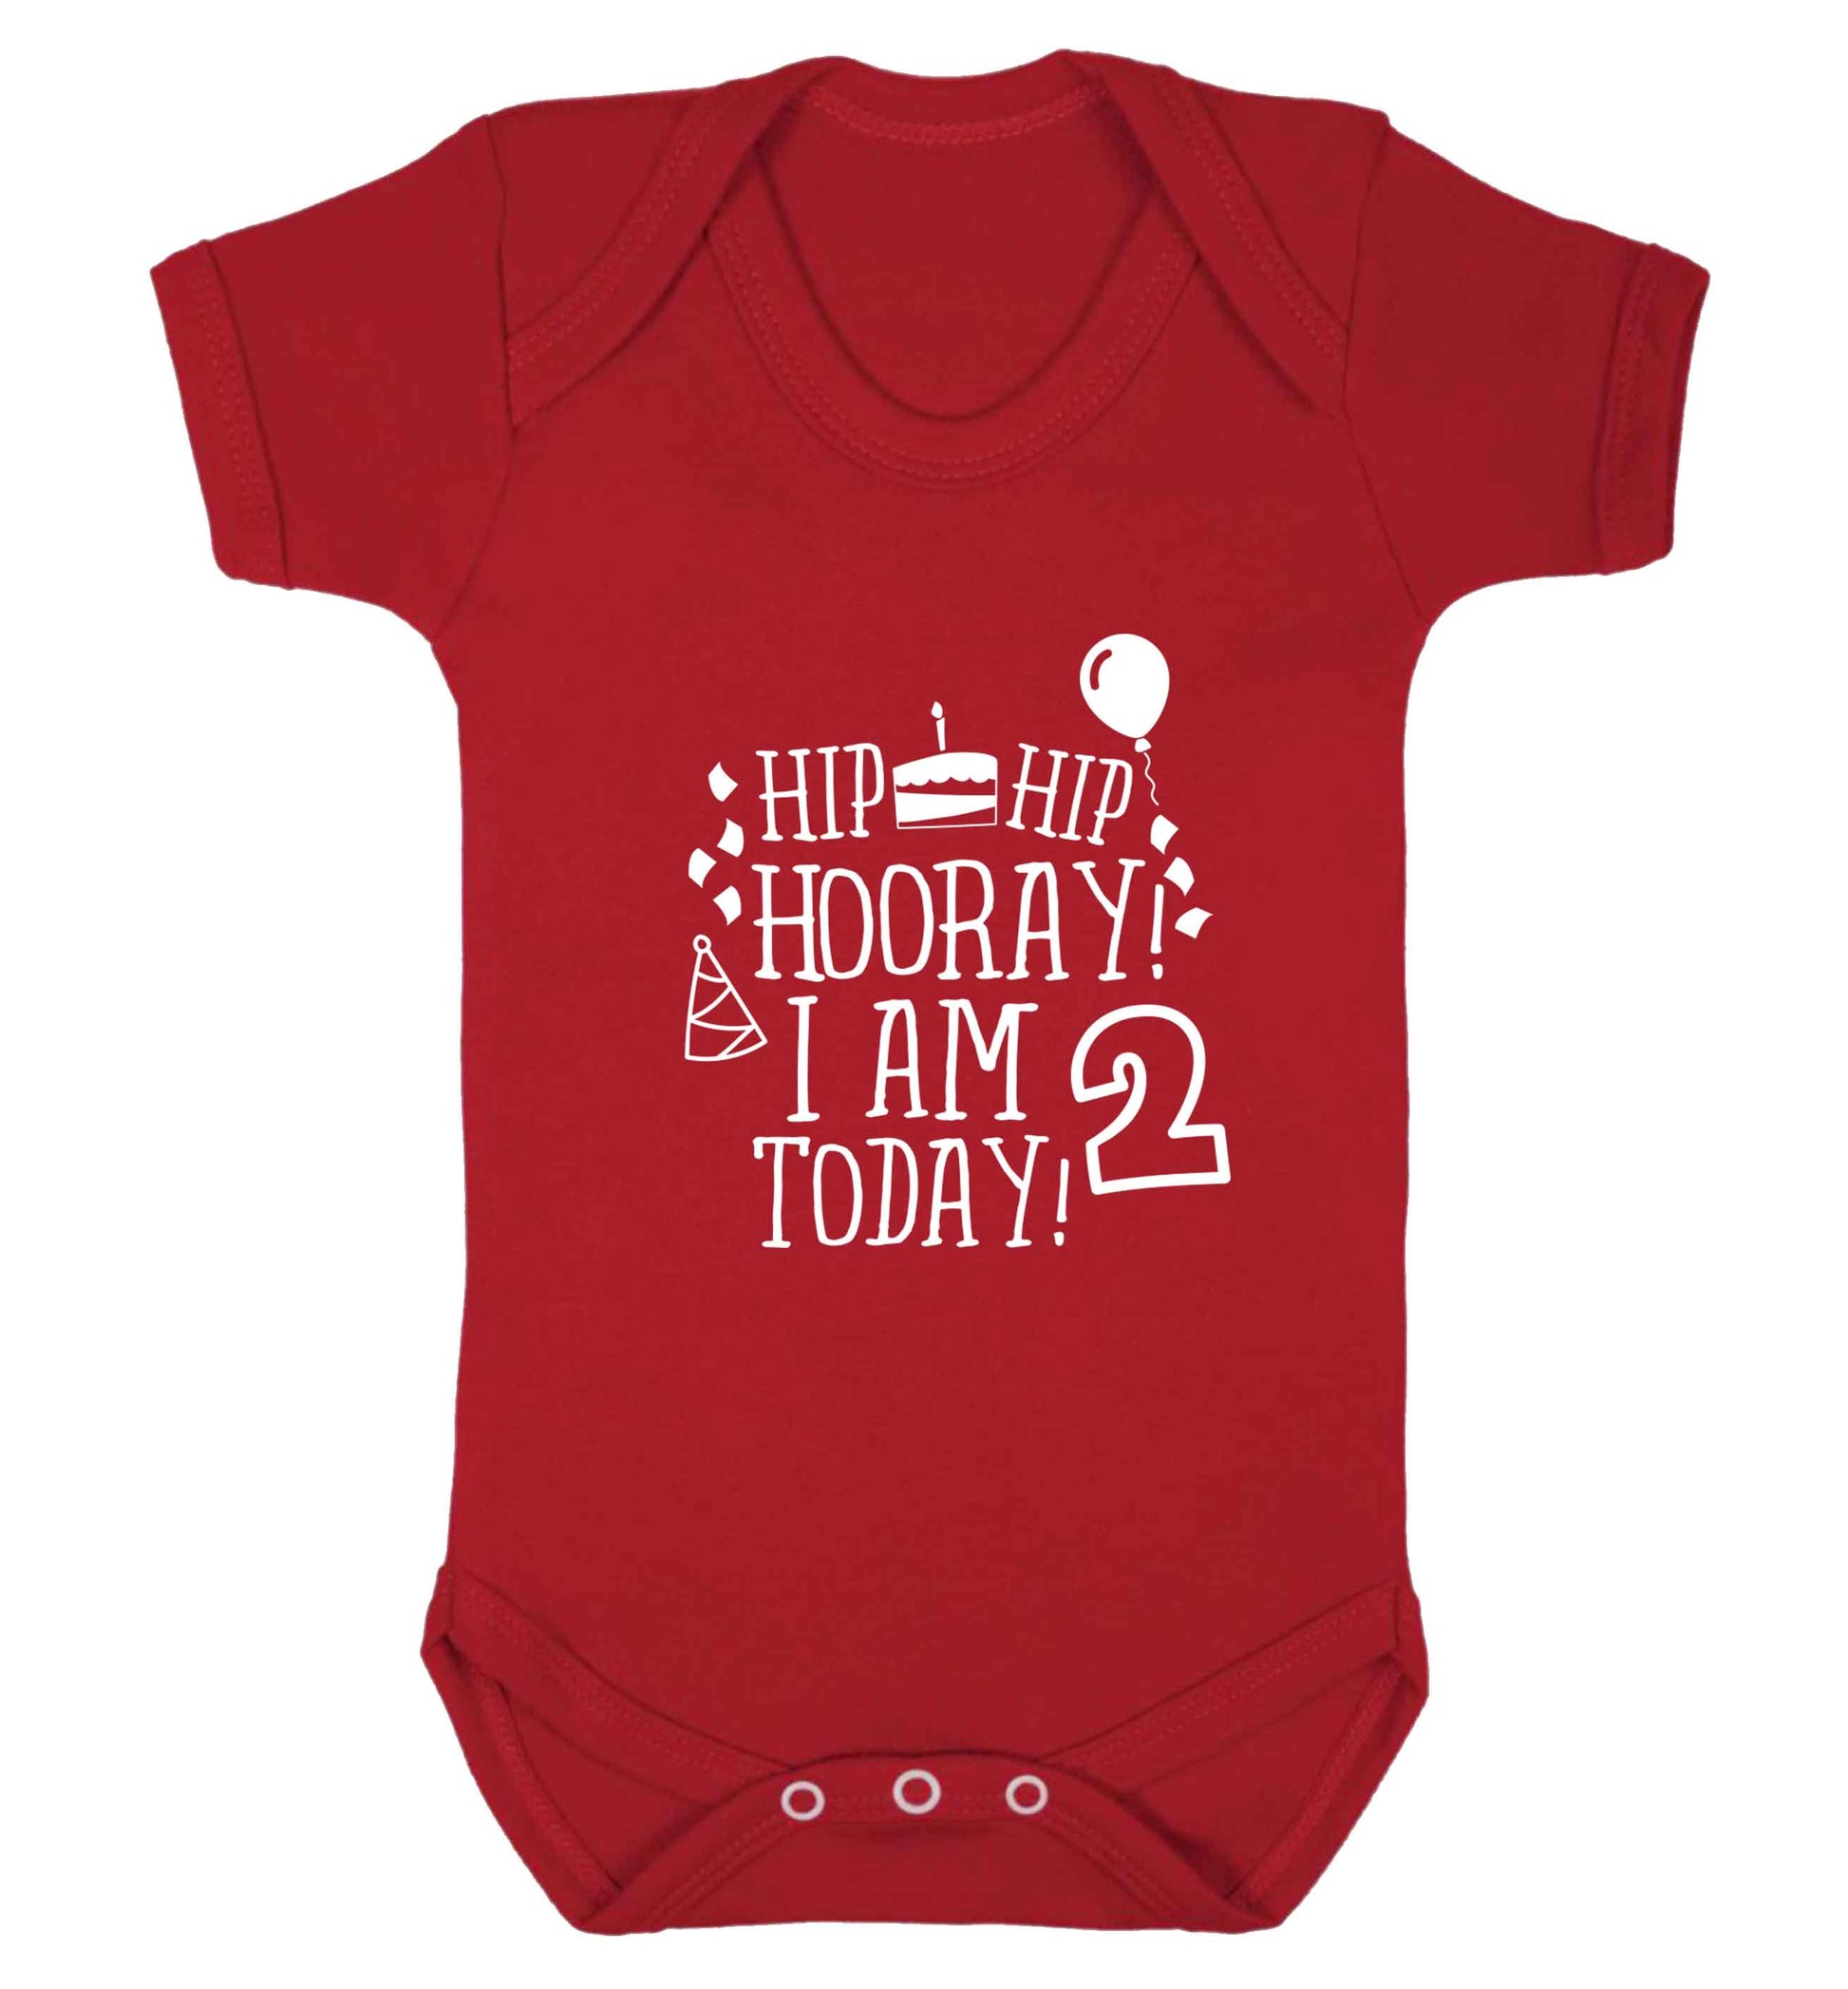 I'm 2 Today baby vest red 18-24 months